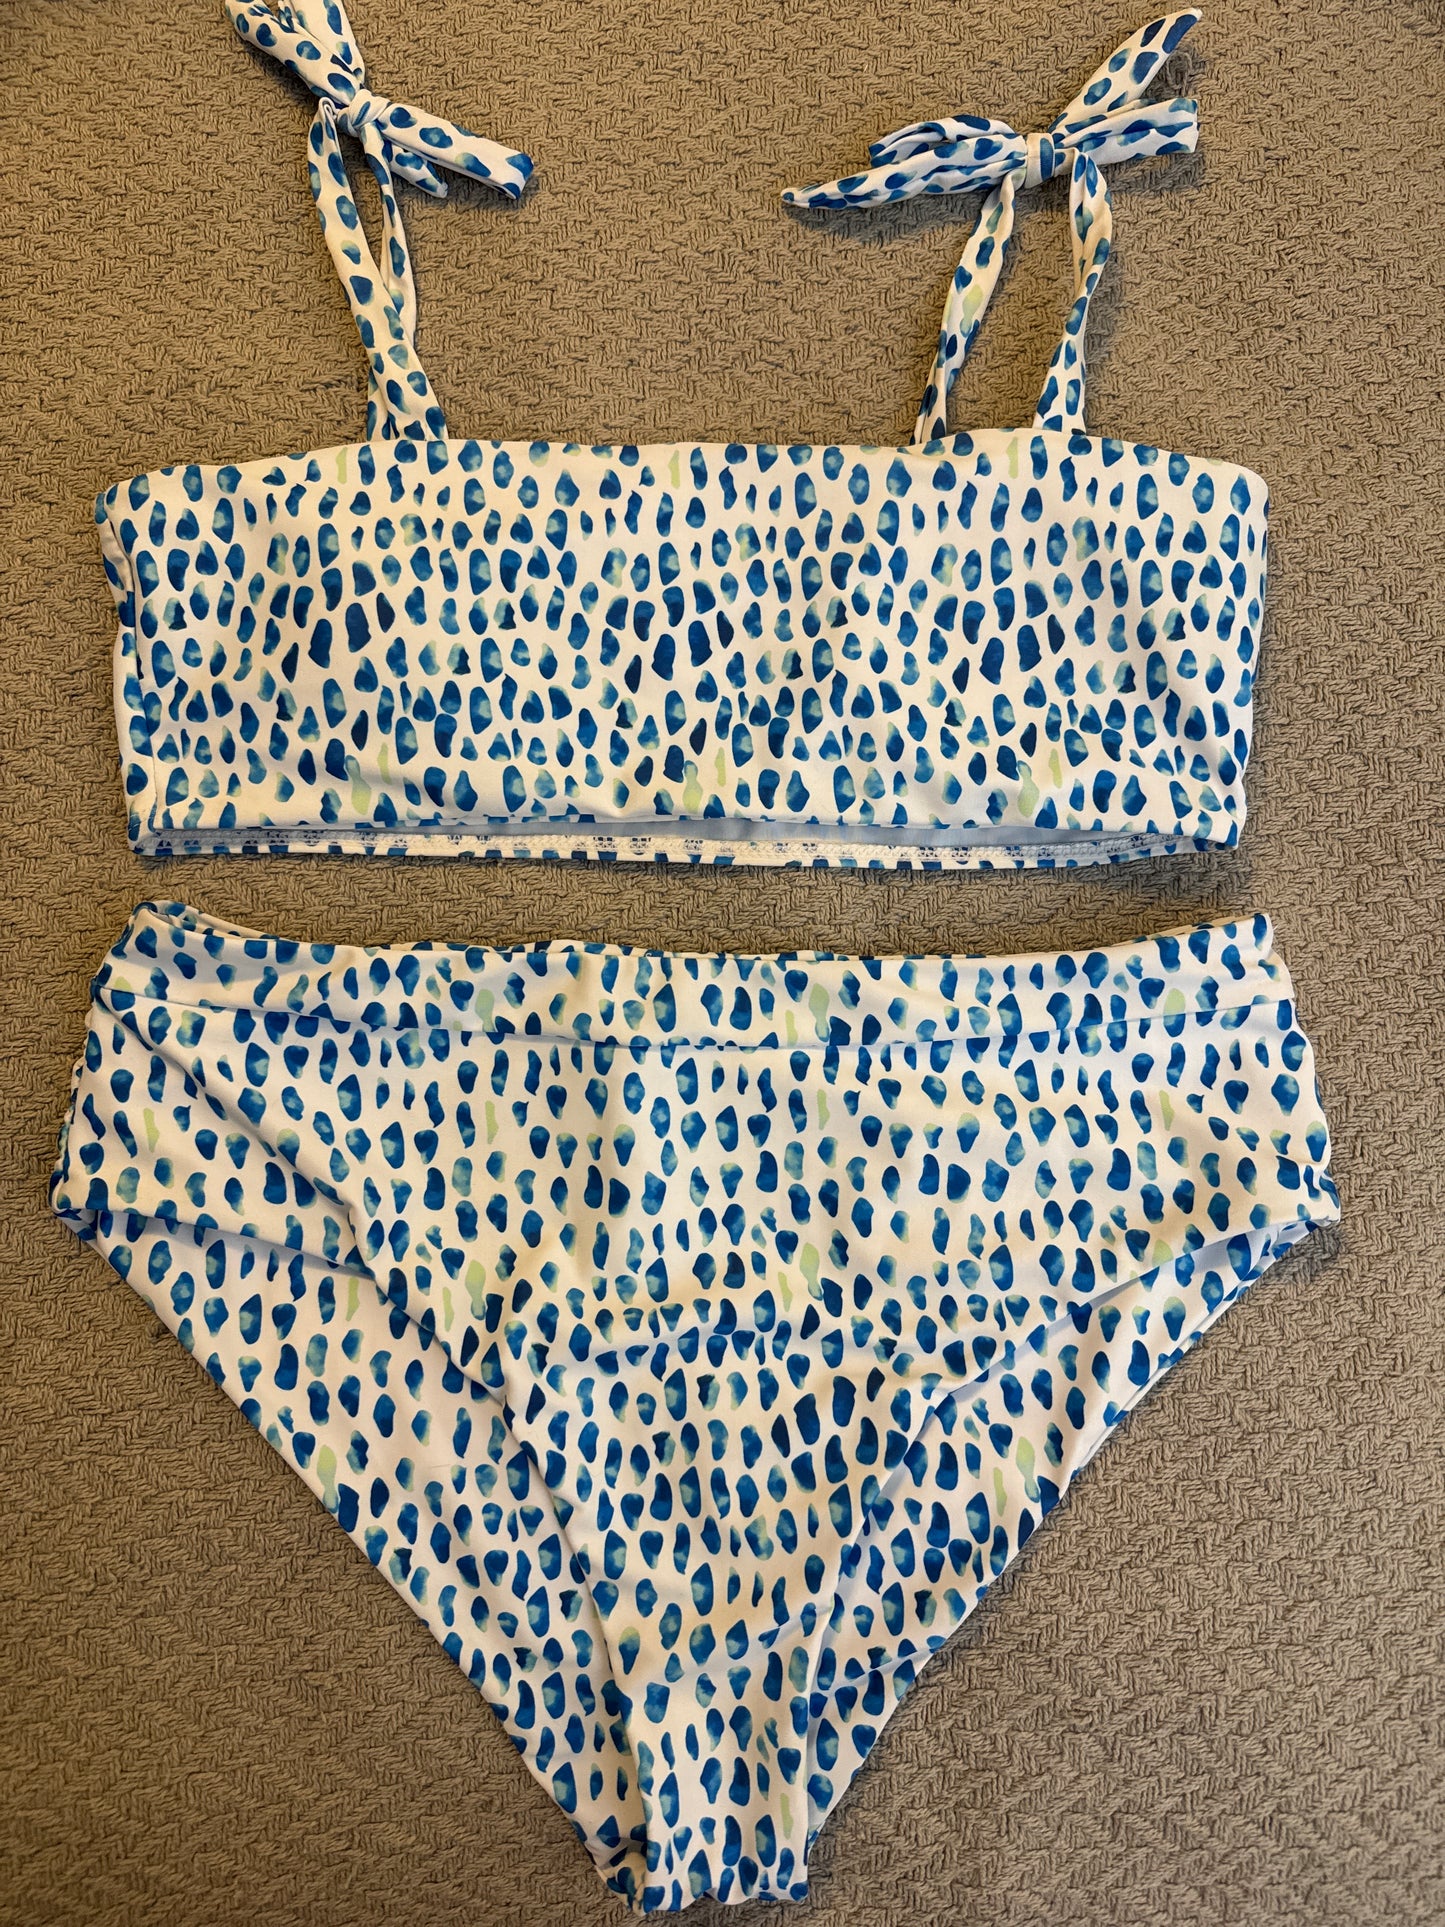 Shein White and Blue Polka Dot 2pc Bathing Suit, Women's Size L